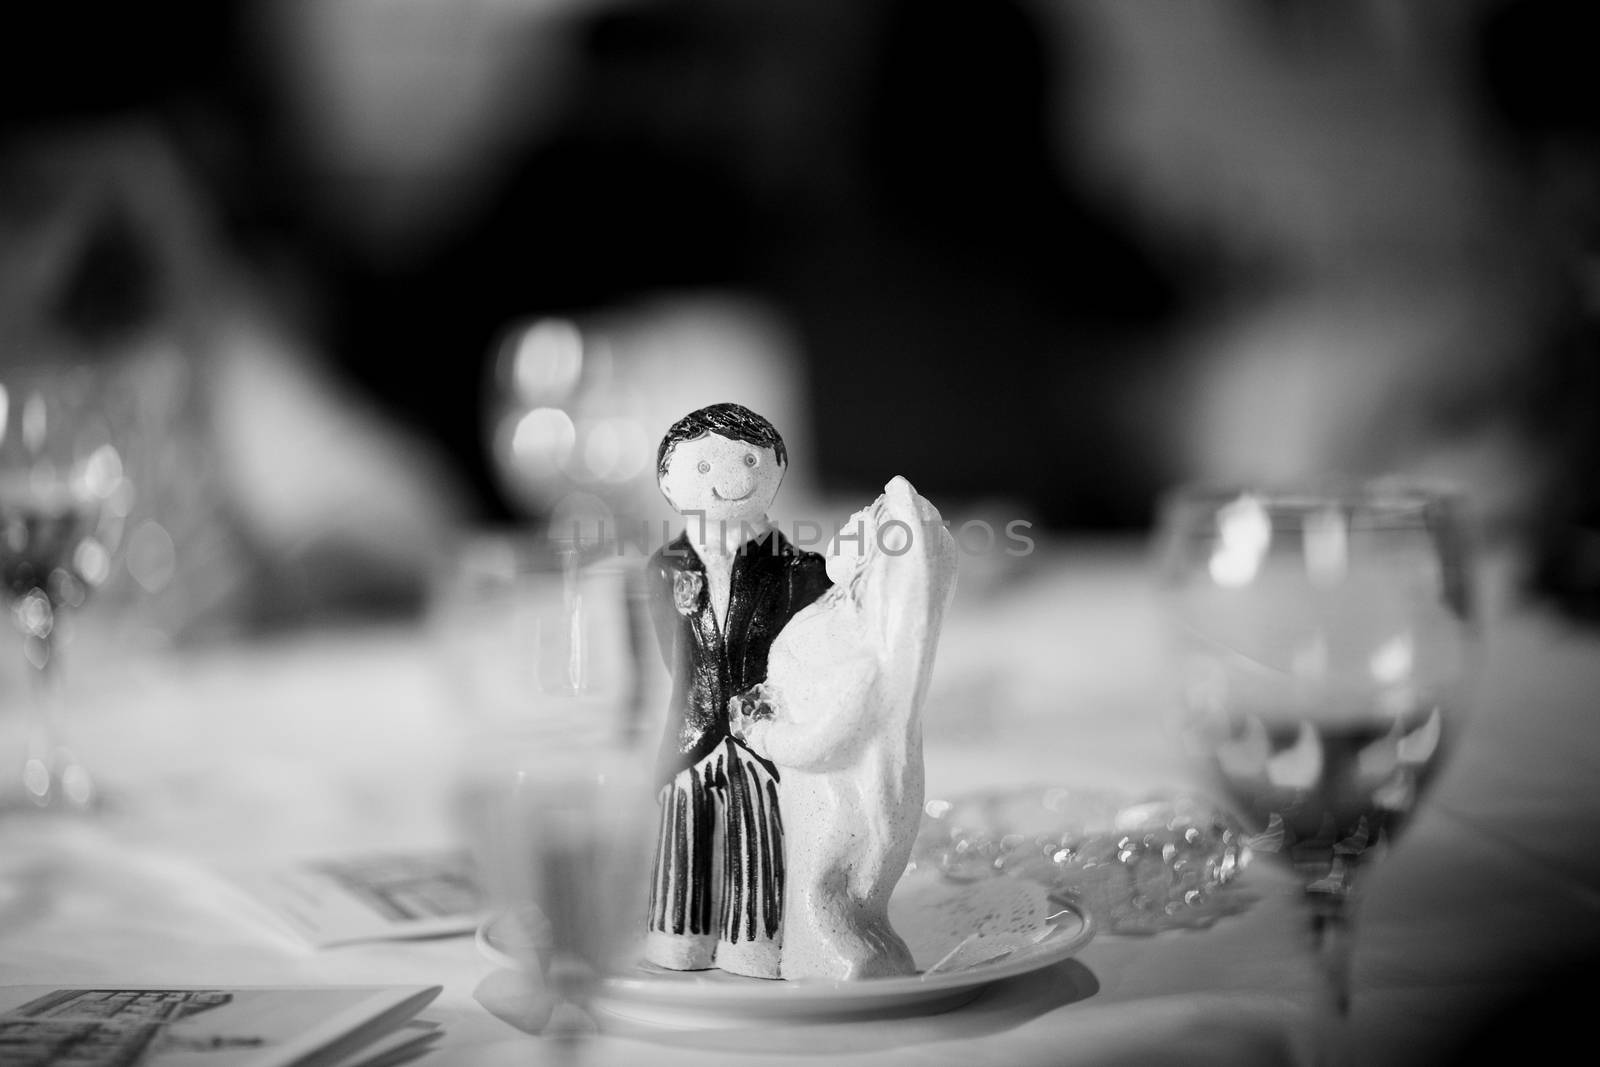 Wedding cake topper figurine bridegroom bride on wedding reception marriage banquet table black and white photo.